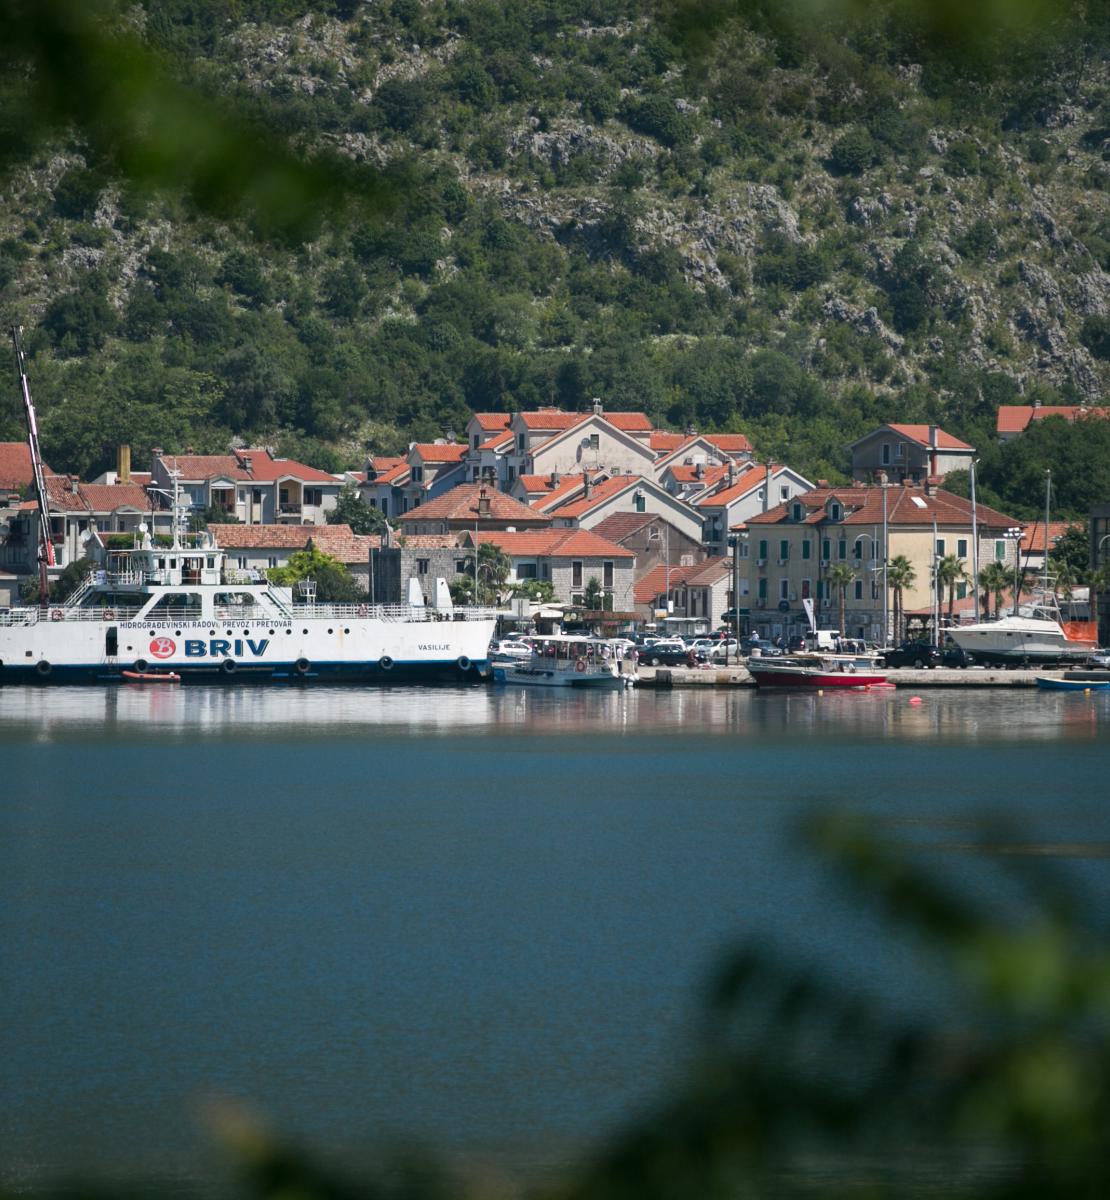 An image of a harbor with boats, buildings, and trees in the background.